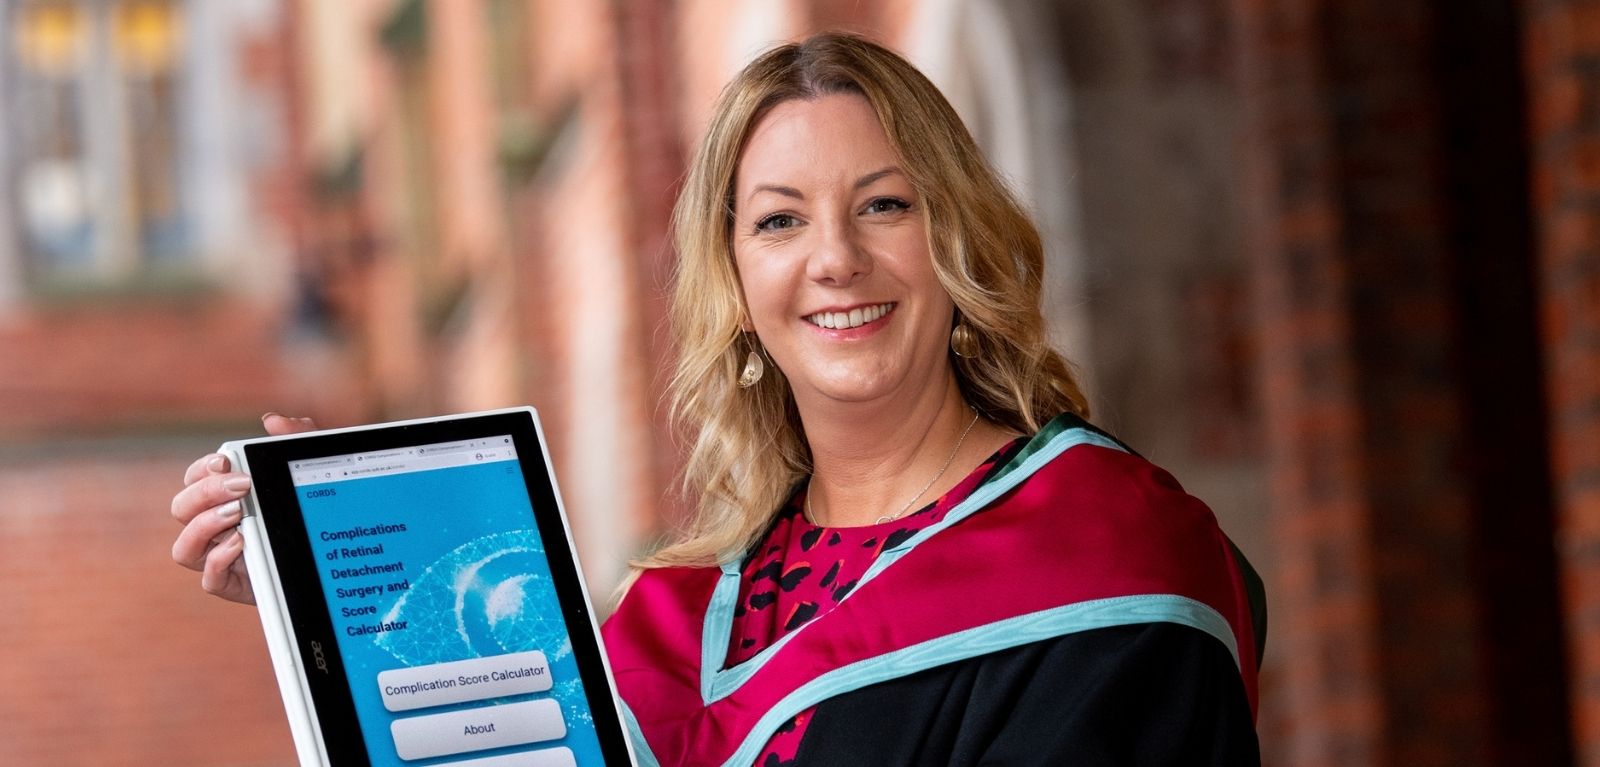 2021 Jenni Has Eye On The Prize As She Graduates With MSc In Software Development News